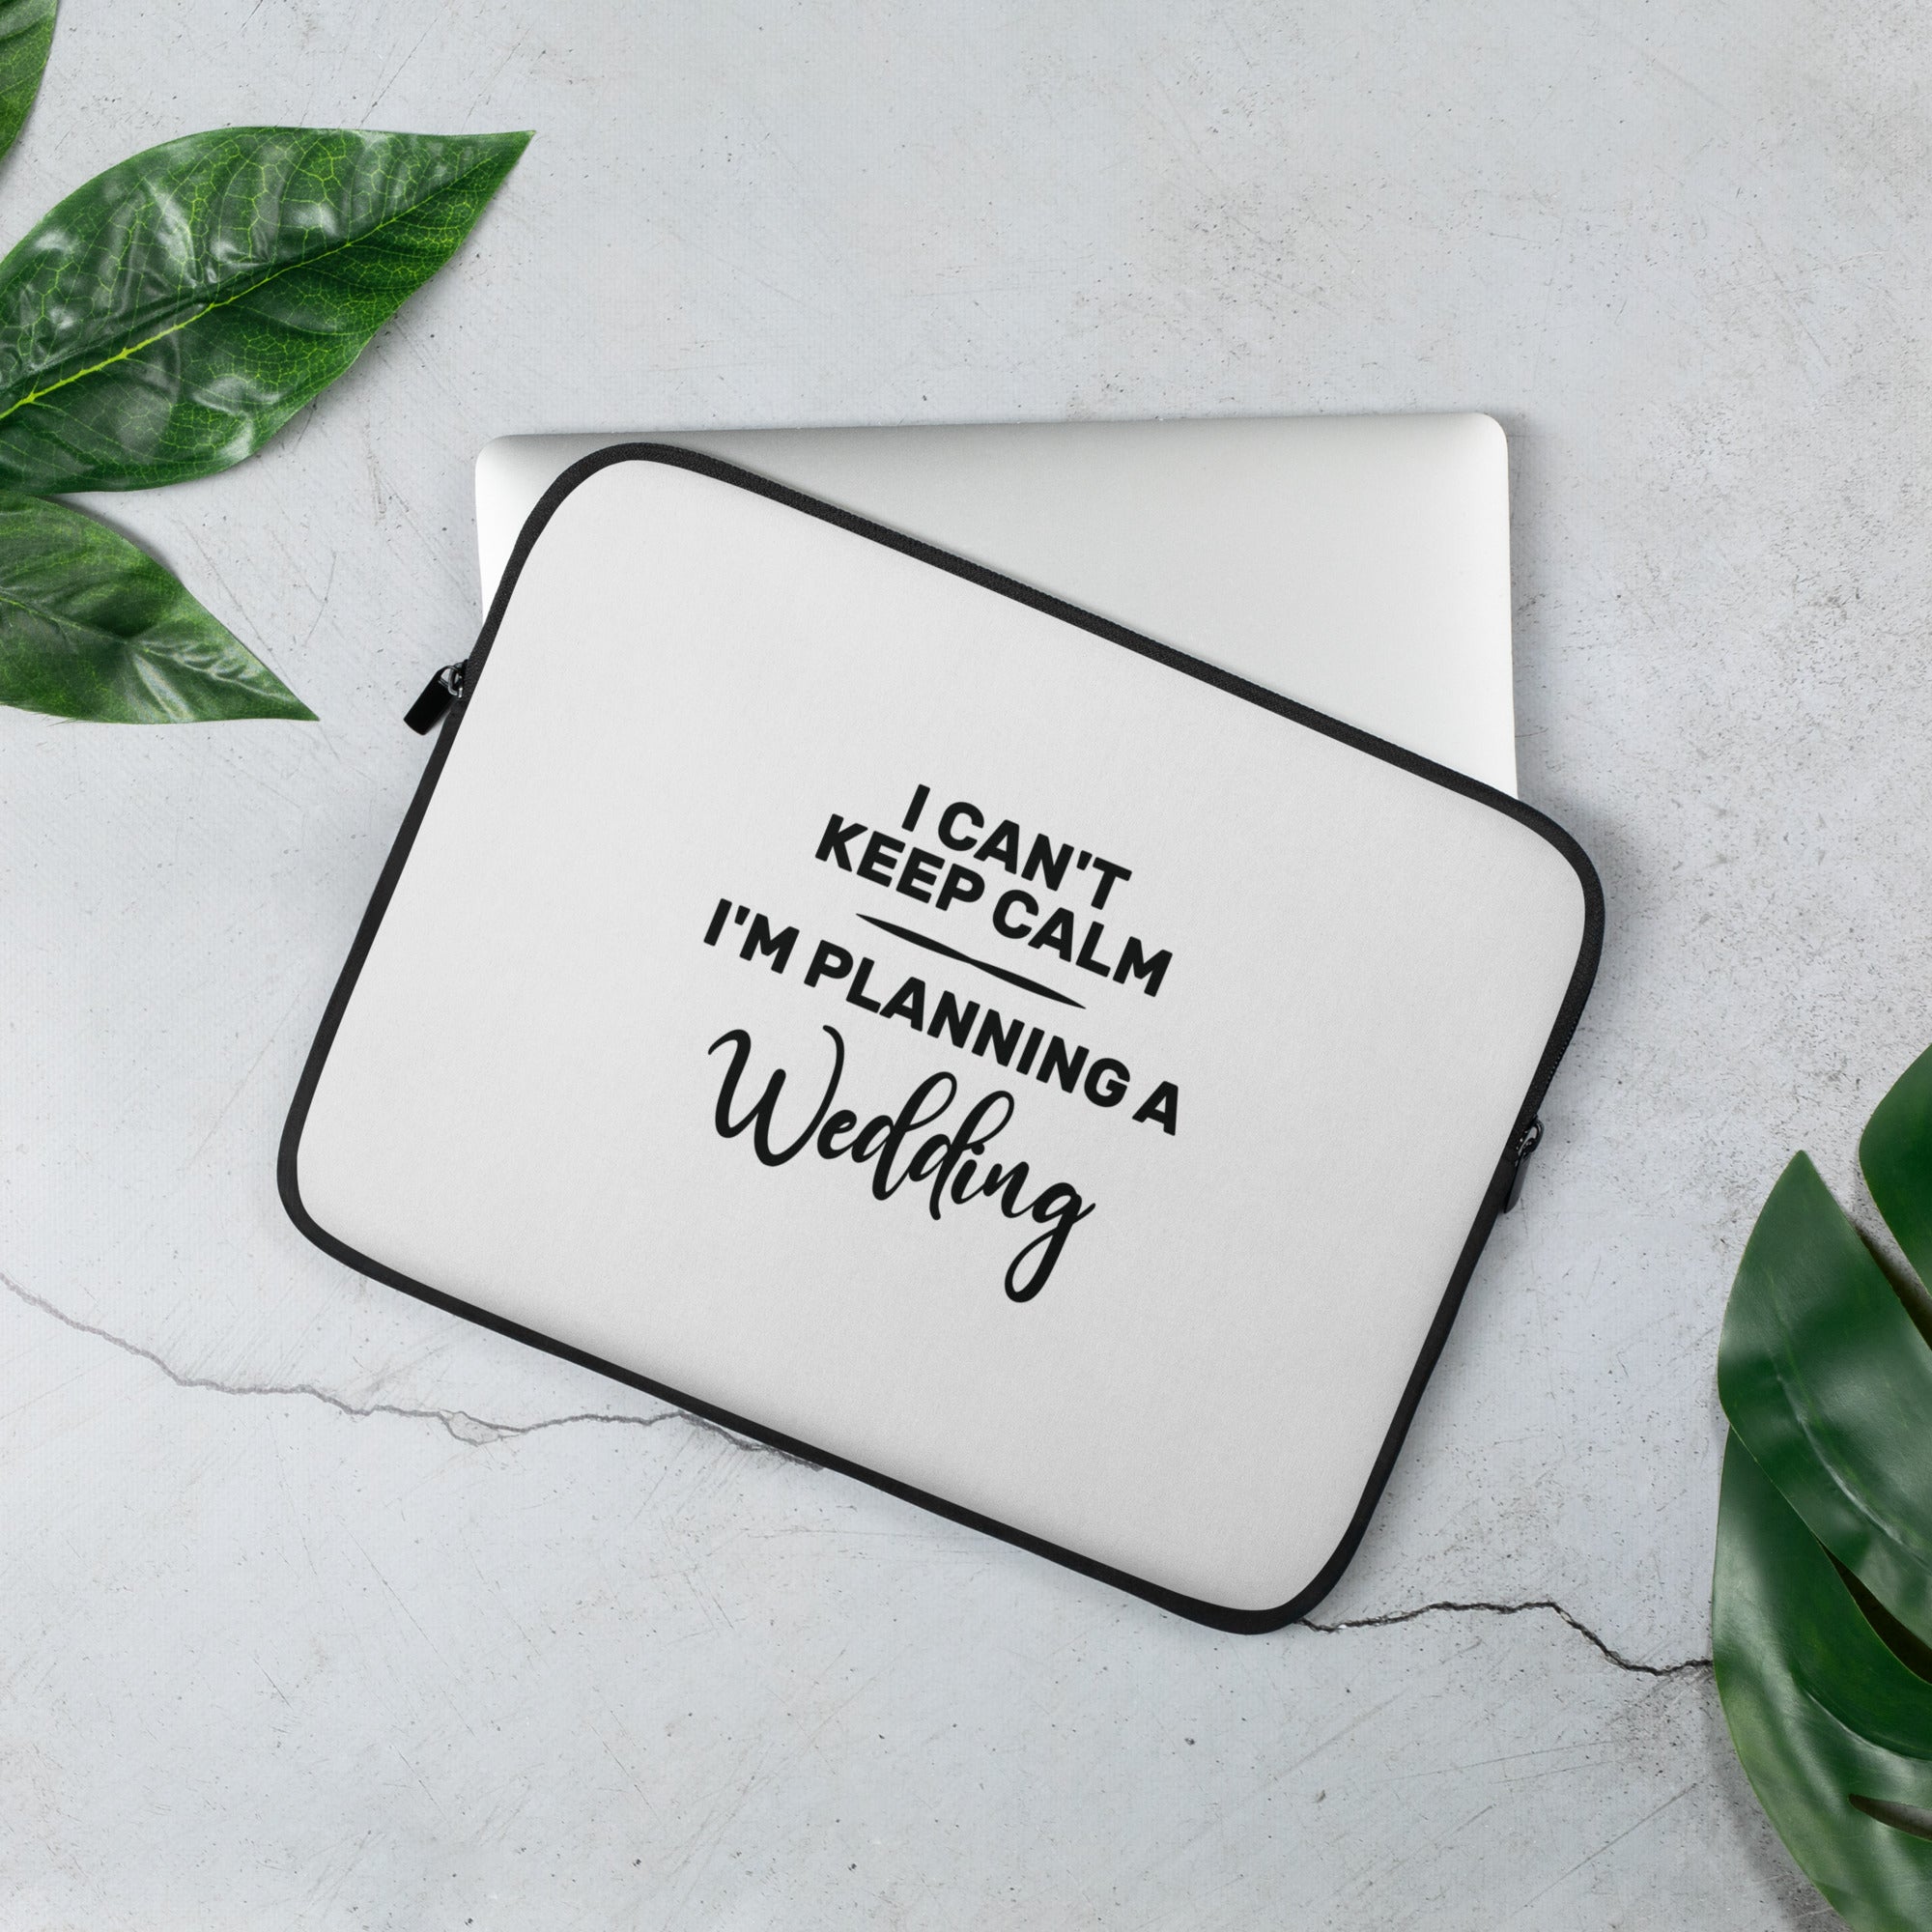 Laptop Sleeve | I can't keep calm I'm planning a wedding